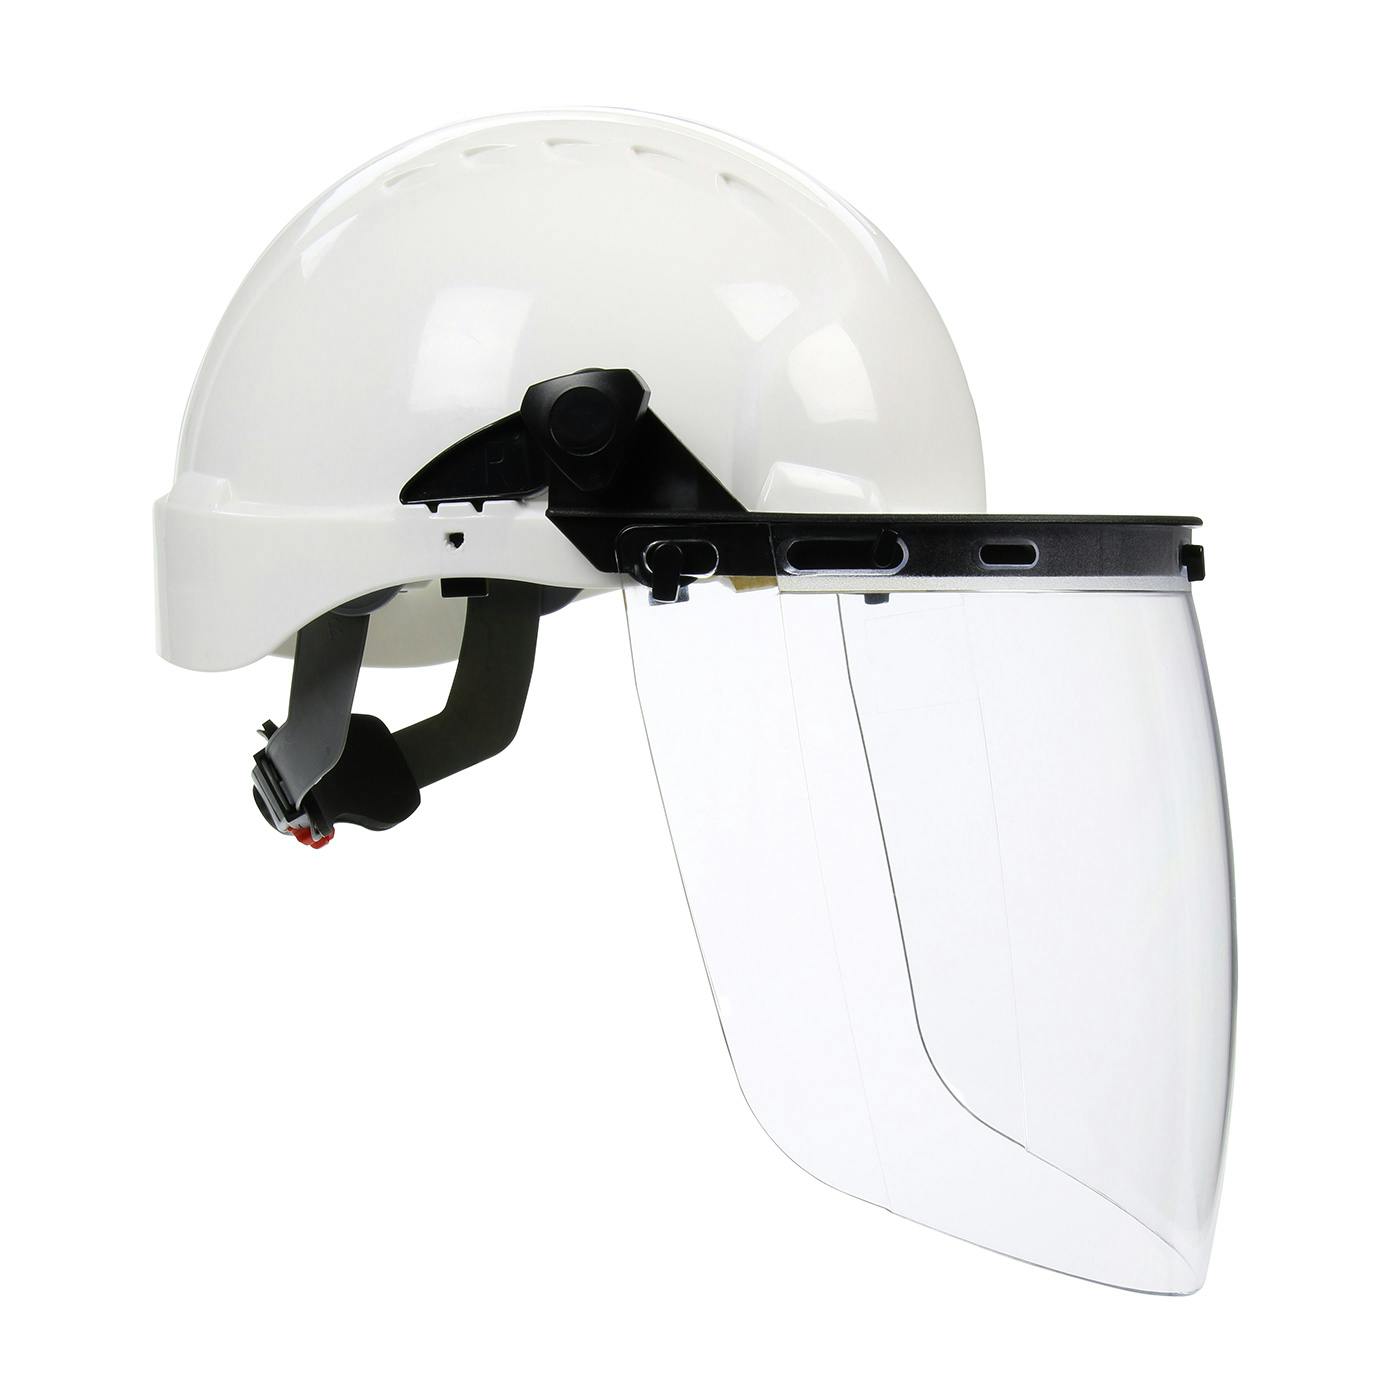 Plastic Face Shield Bracket for Cap Style Hard Hats with Universal Slots, Black (251-01-5225) - OS